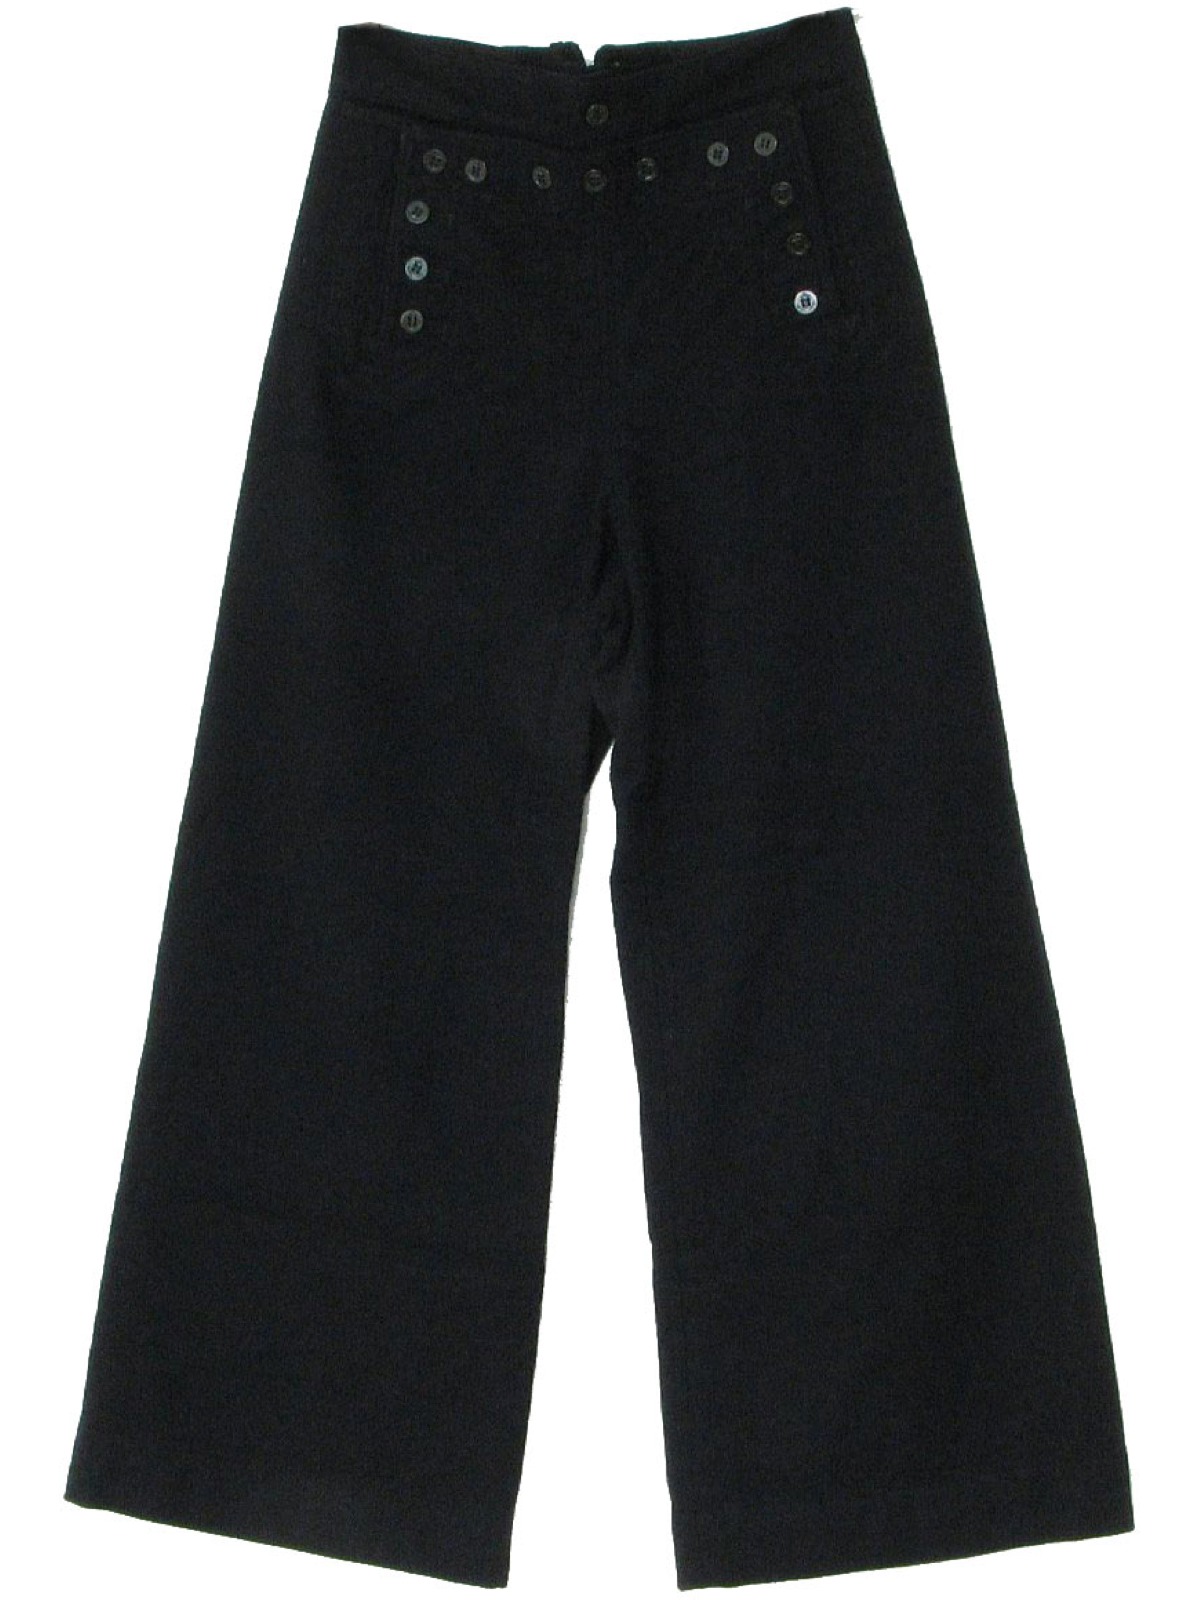 Vintage Navy Issue 1960s Bellbottom Pants: 60s -Navy Issue- Mens ...